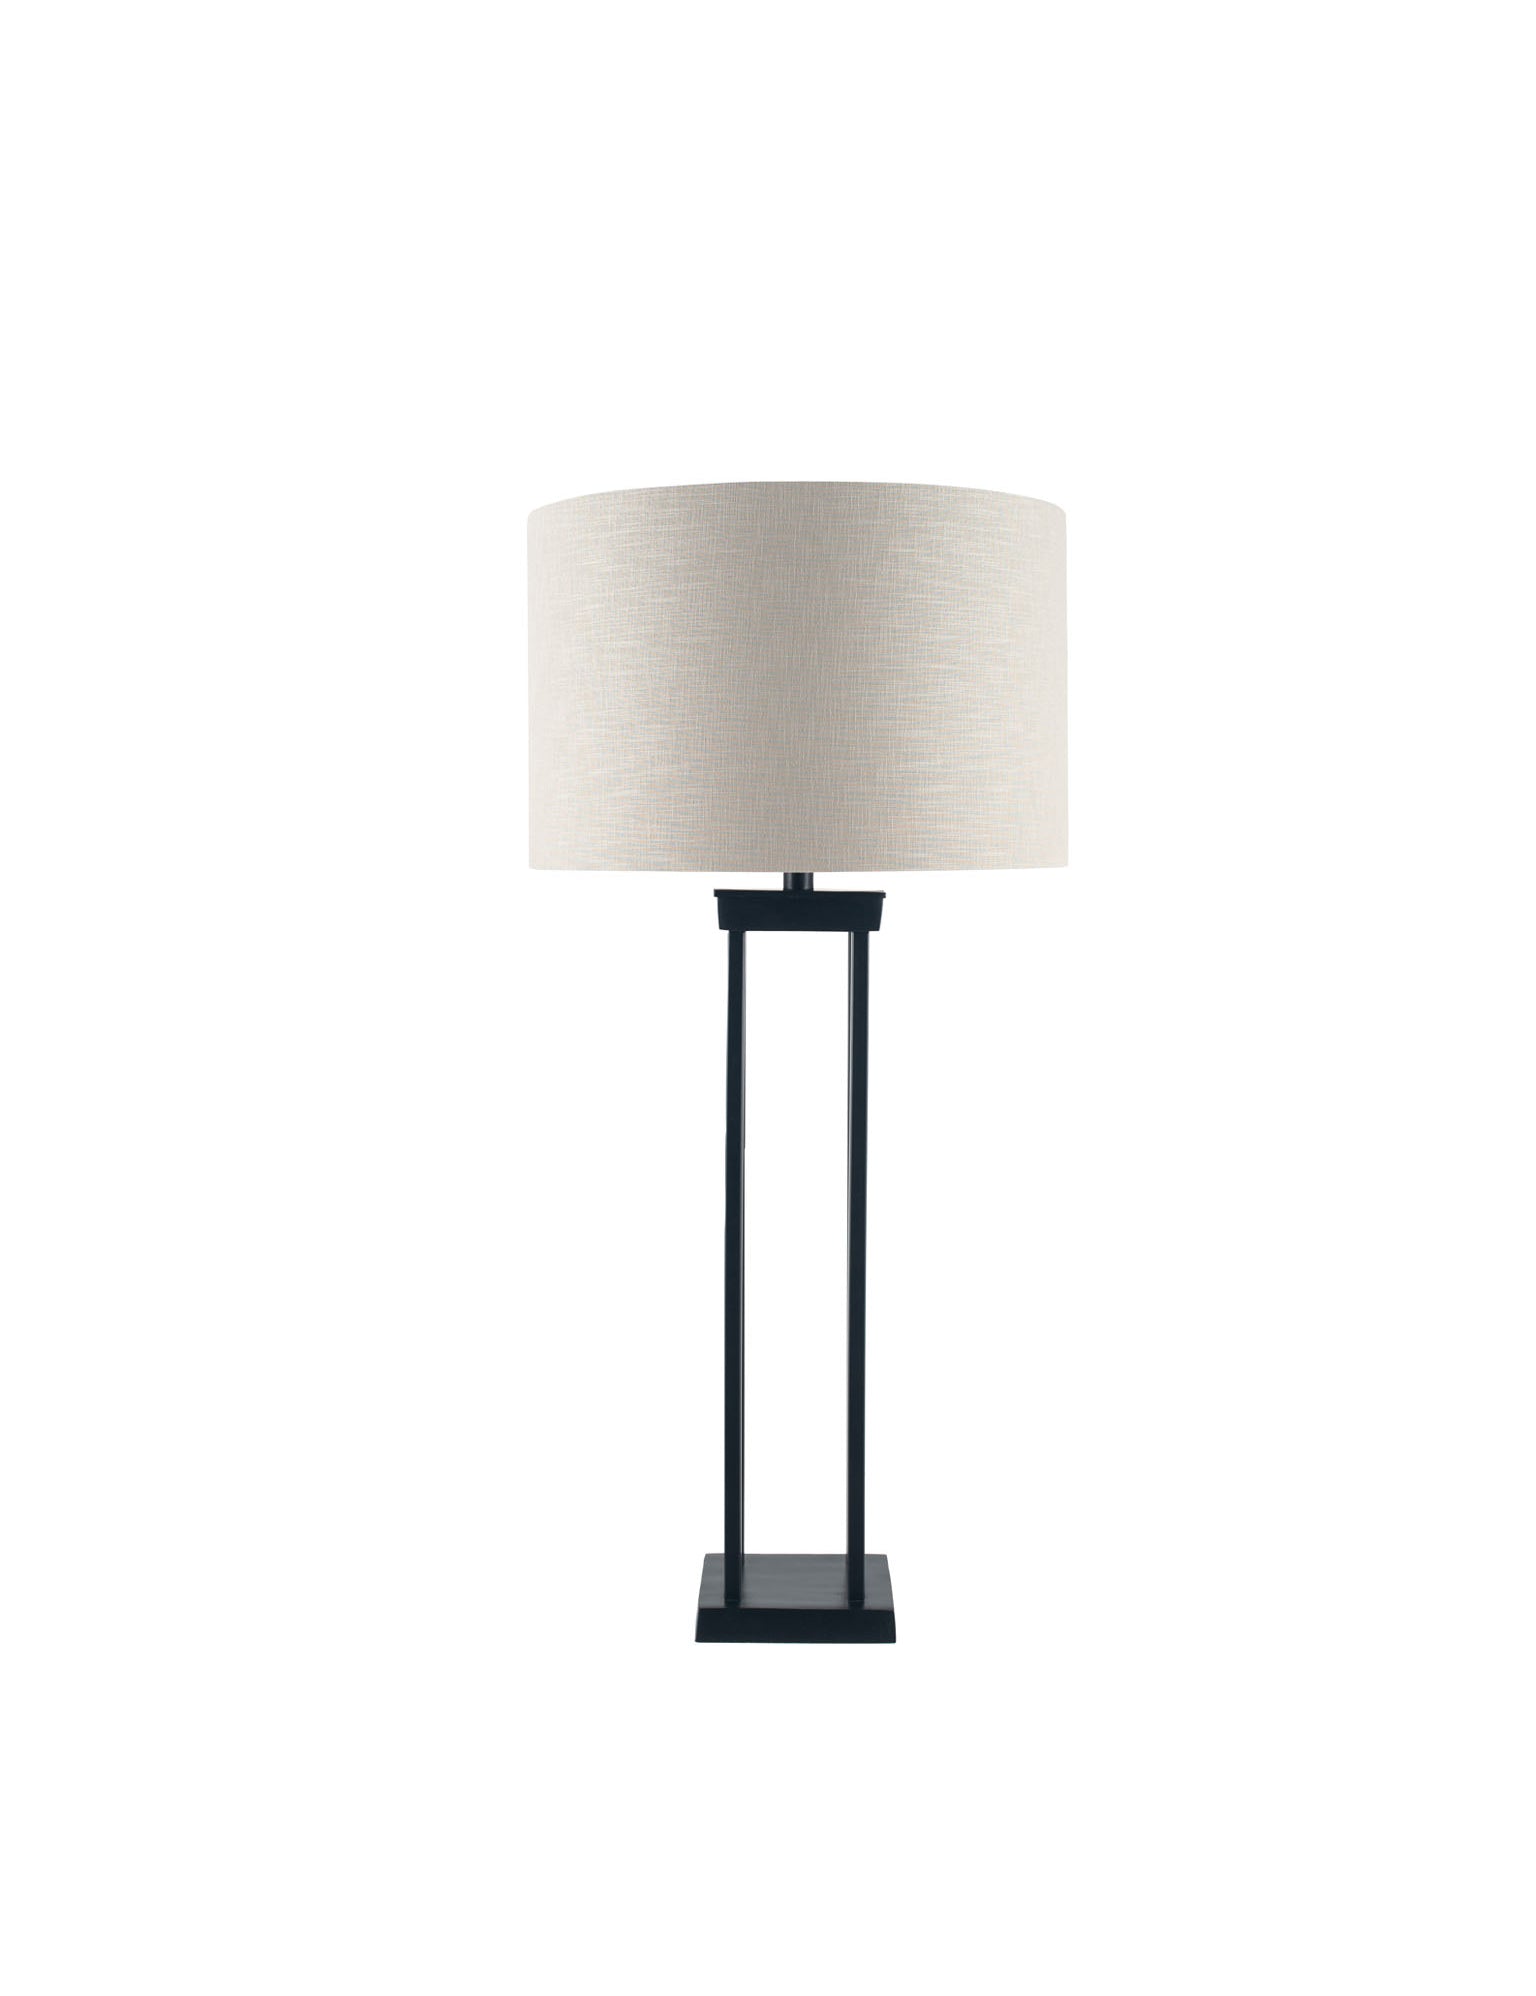 black column lamp base with taupe cylinder shade